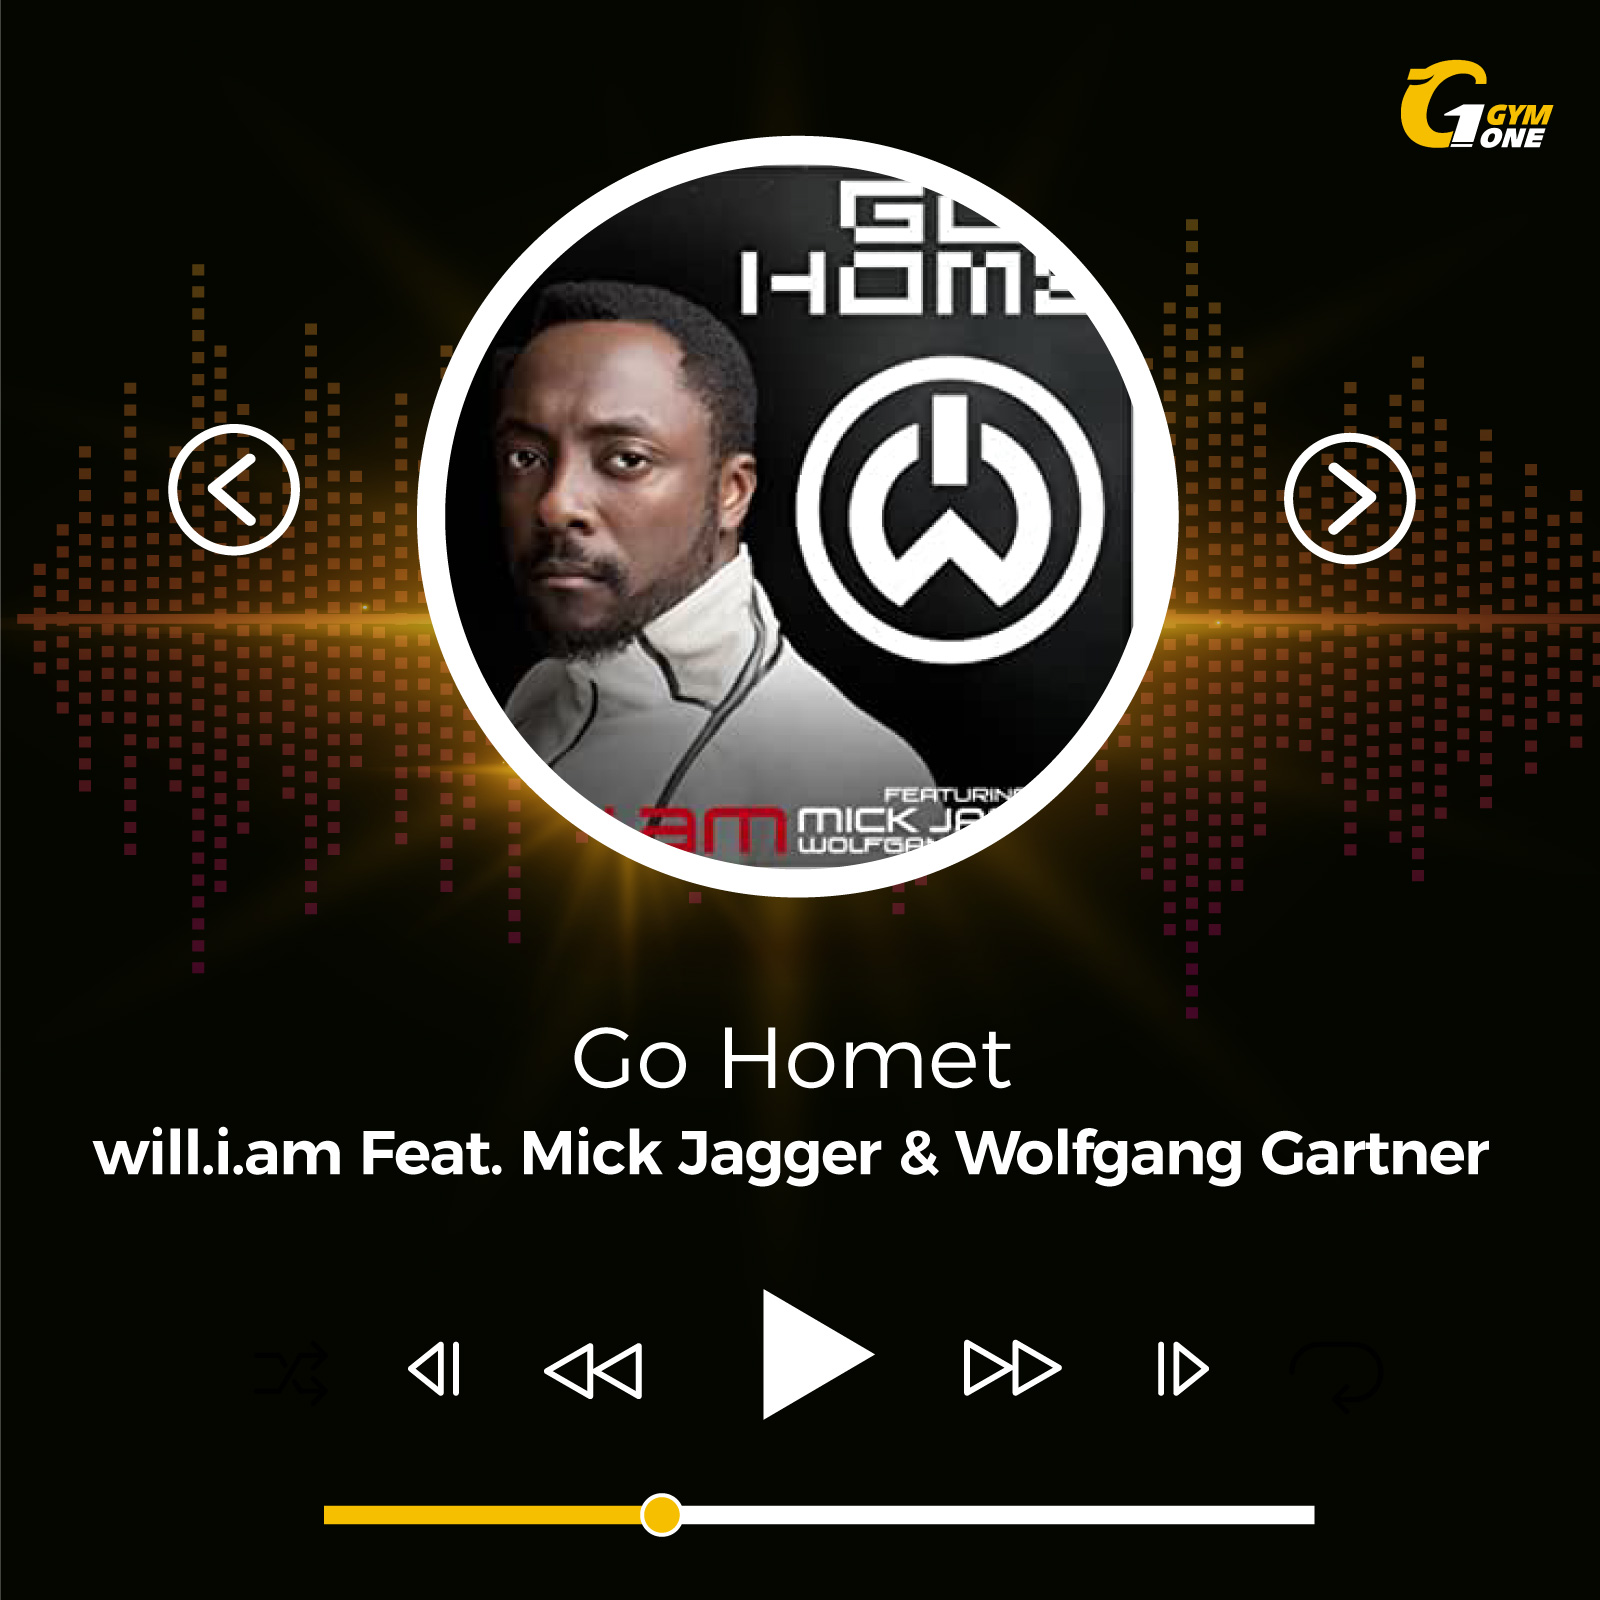  Go home – Will.I.Am